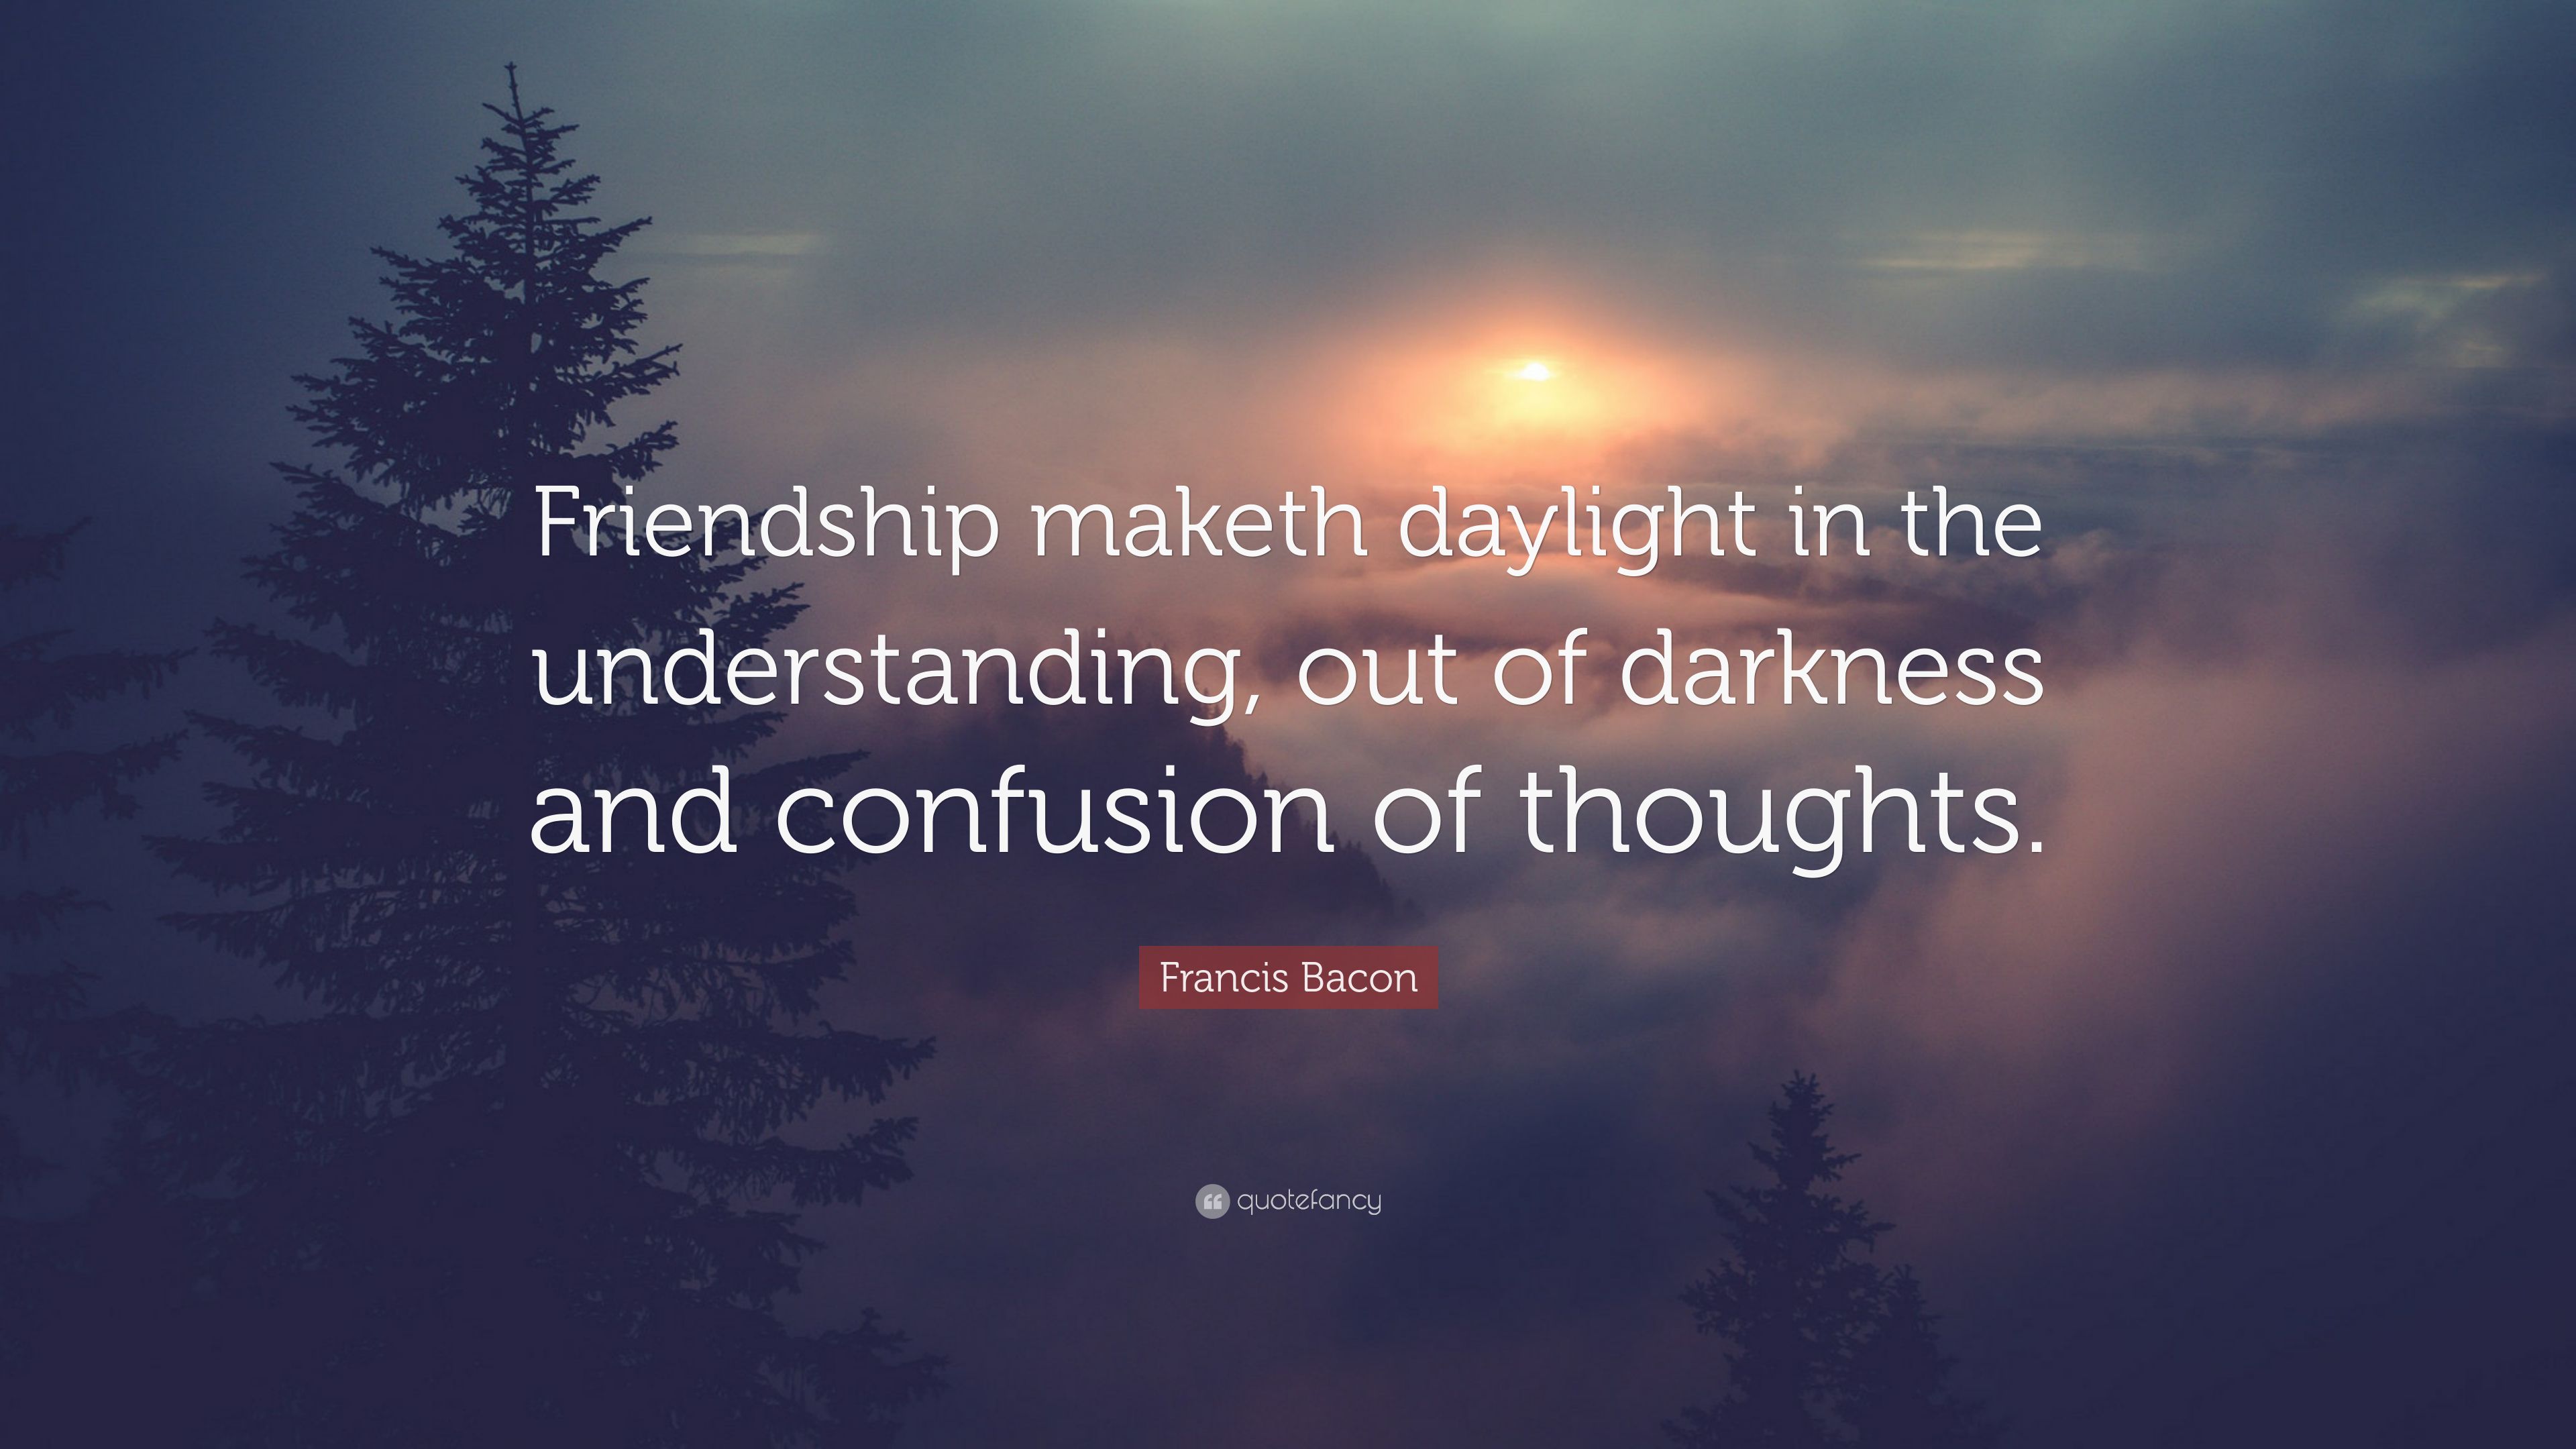 Francis Bacon Quote: “Friendship maketh daylight in